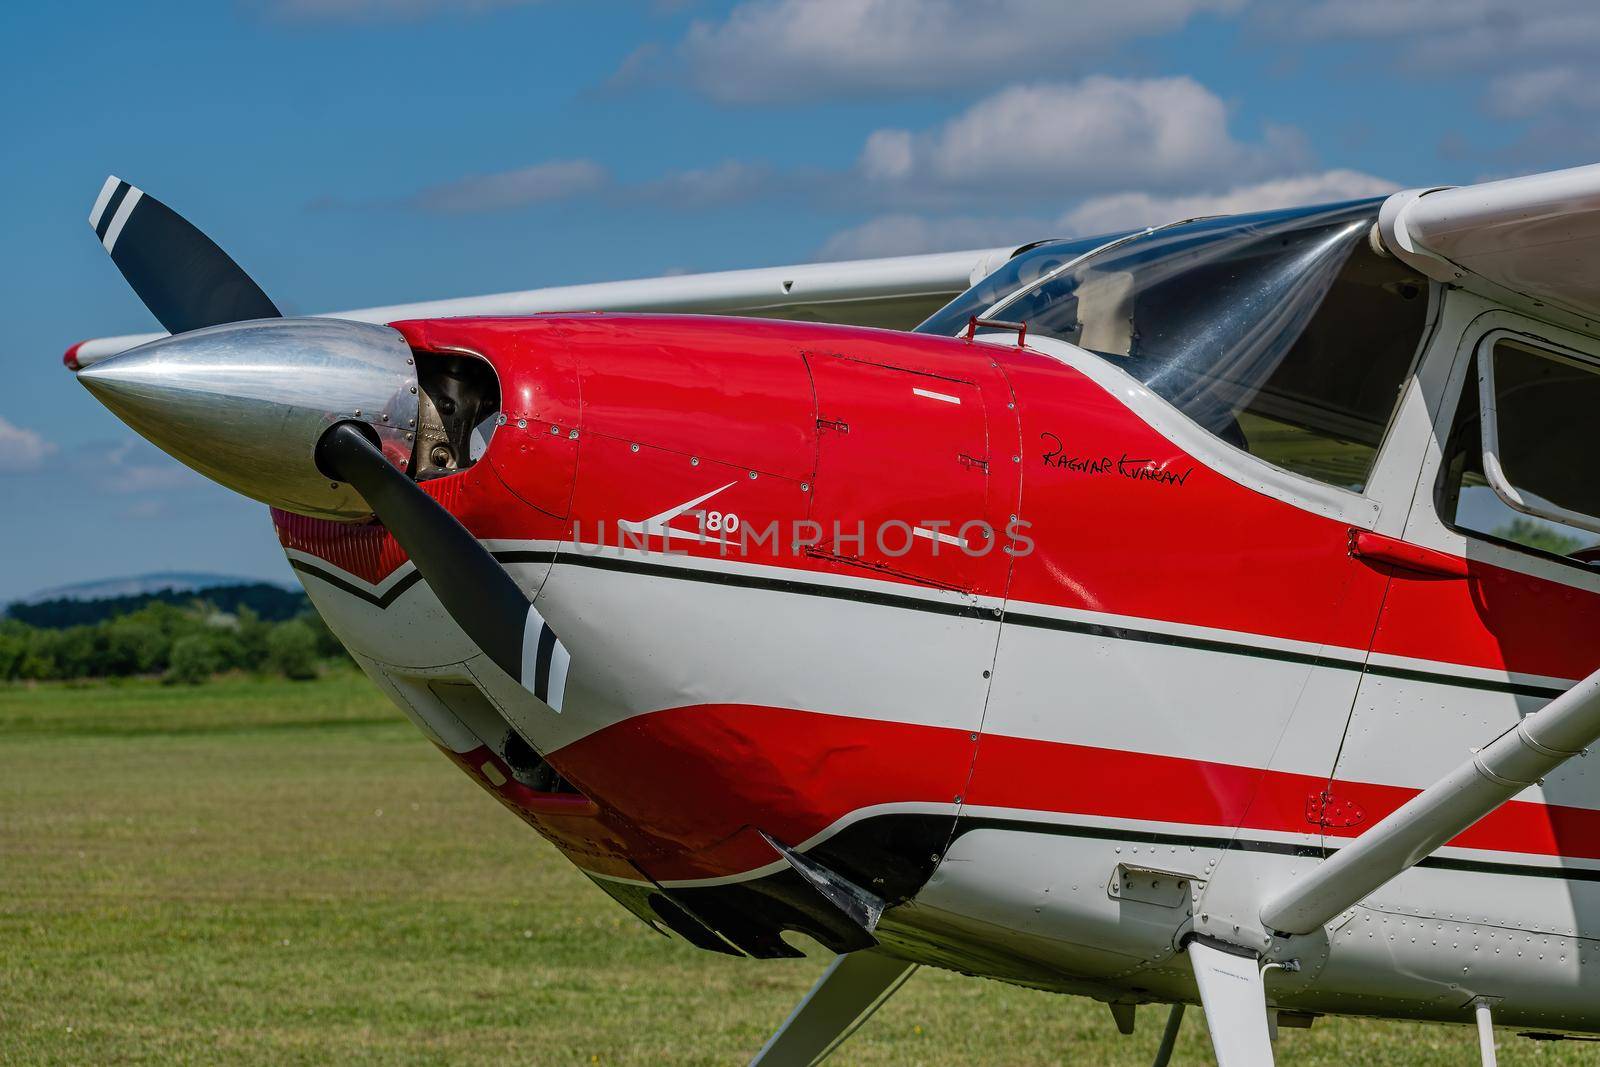 Breclav, Czech Republic - July 02, 2022 Aviation Day. Cessna 180 Skywagon detail of the front of the aircraft